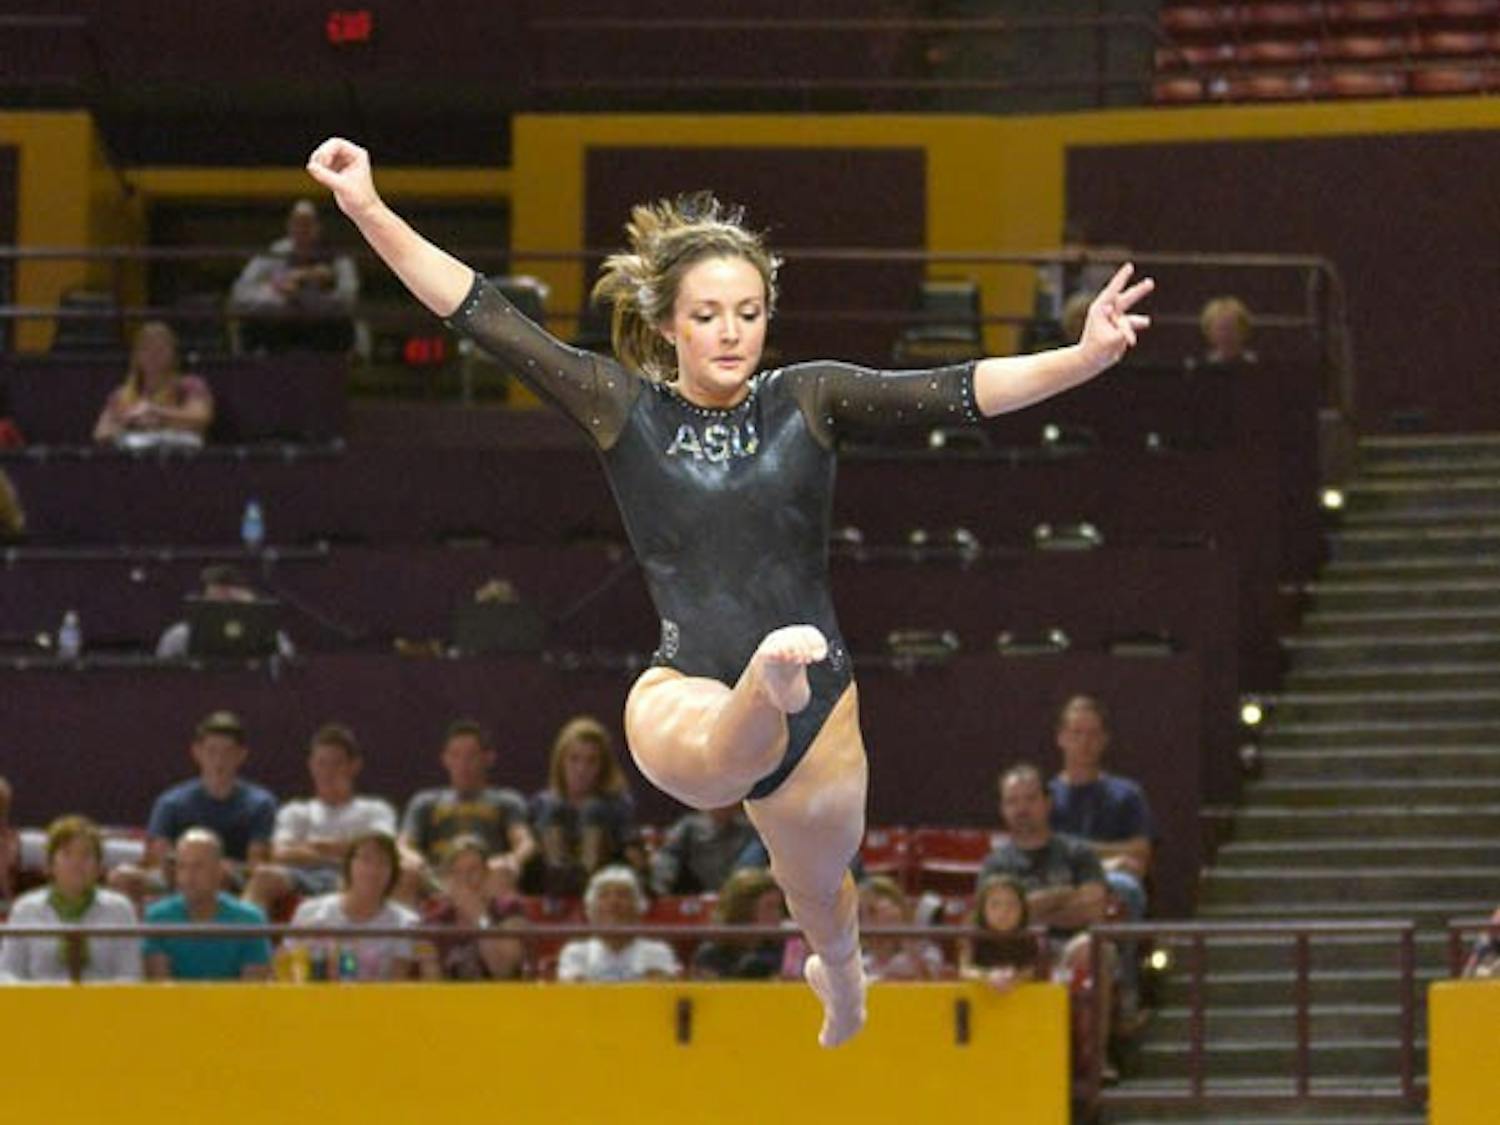 Senior Brianna Gades on the balance beam March 13, 2015 at the Wells Fargo Arena in Tempe. (J. Bauer-Leffler/The State Press)